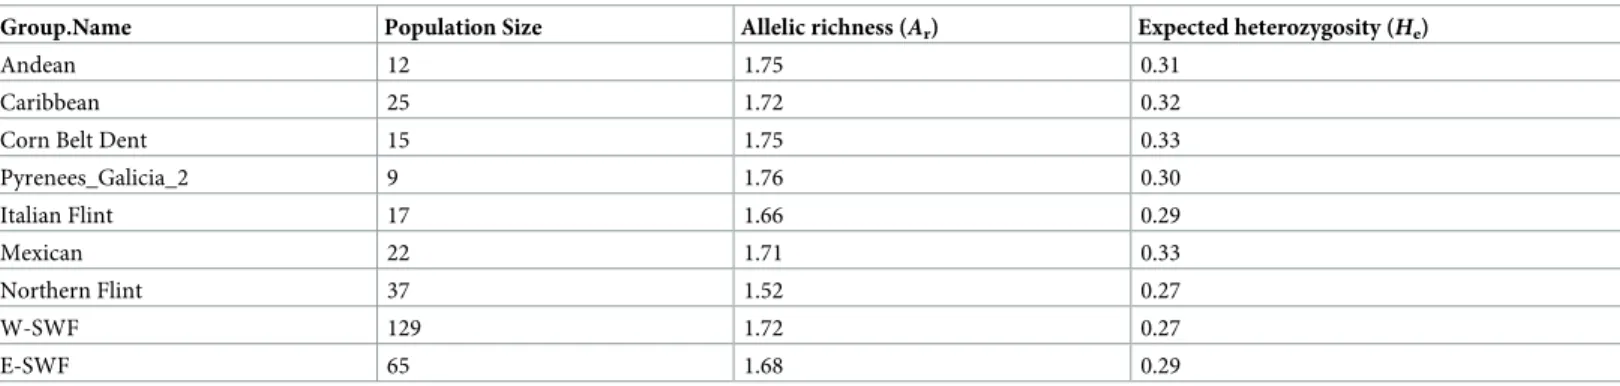 Table 1. Allelic richness (A r ) and gene diversity (expected heterozygosity, H e ) for the two SWF groups identified with admixture at K = 2 and the 7 genetic groups previously identified in Camus-Kulandaivelu et al